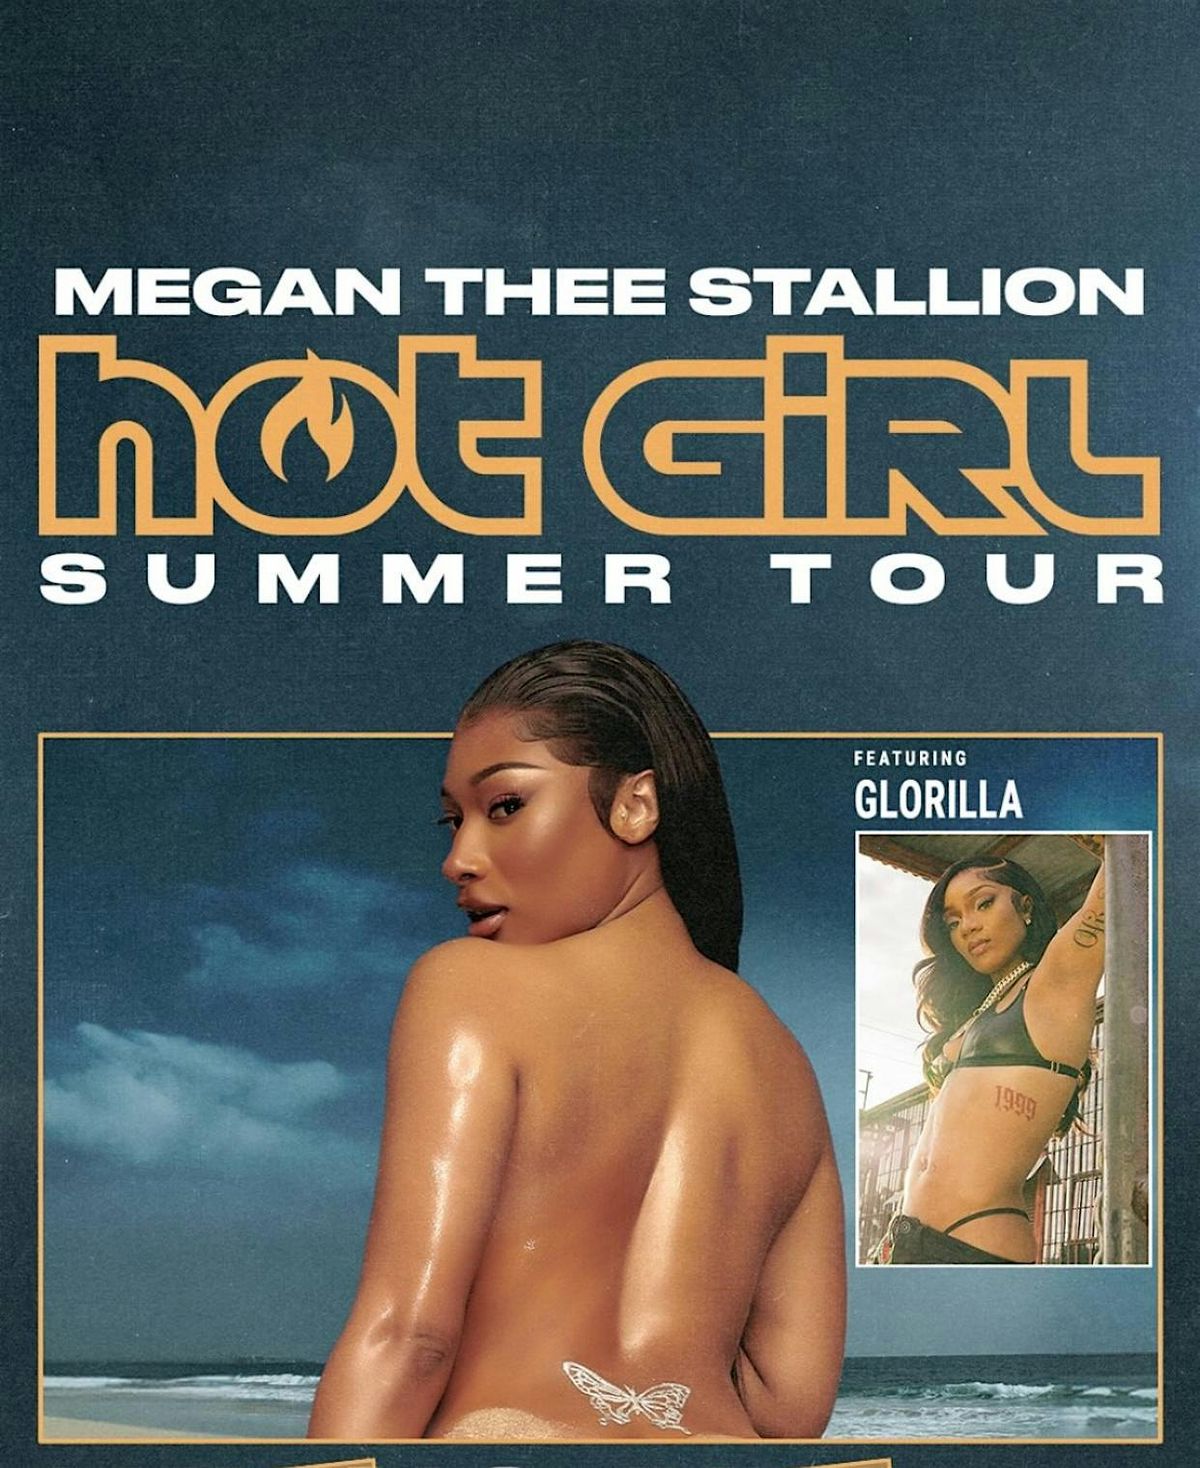 HOT GIRL SUMMER TOUR CONCERT AFTER PARTY